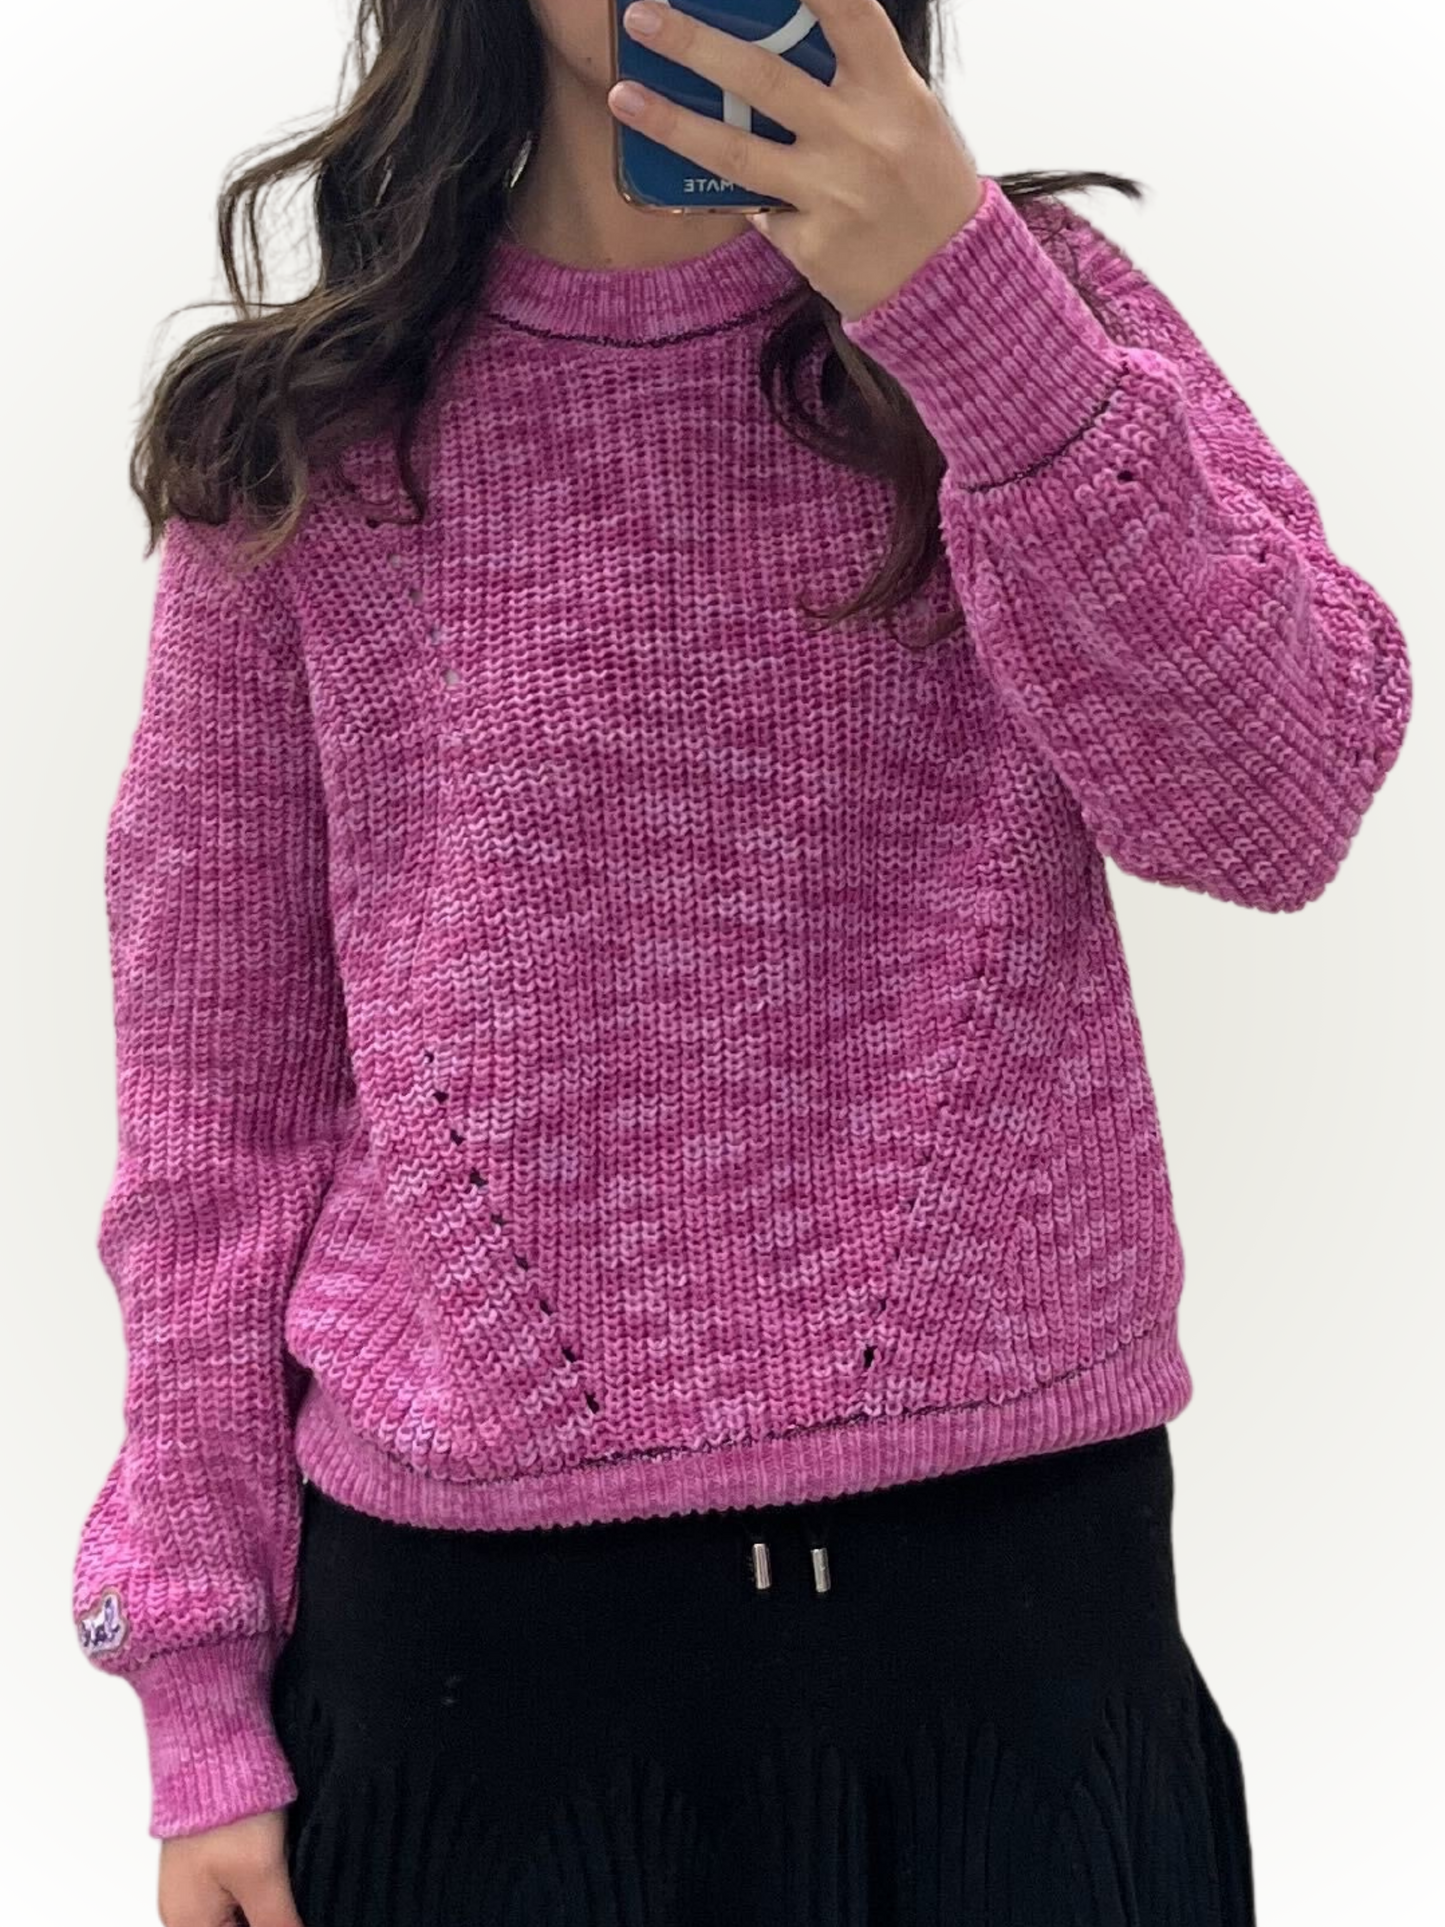 Scotch & Soda Pink Structured Pullover Sweater _173759-6392